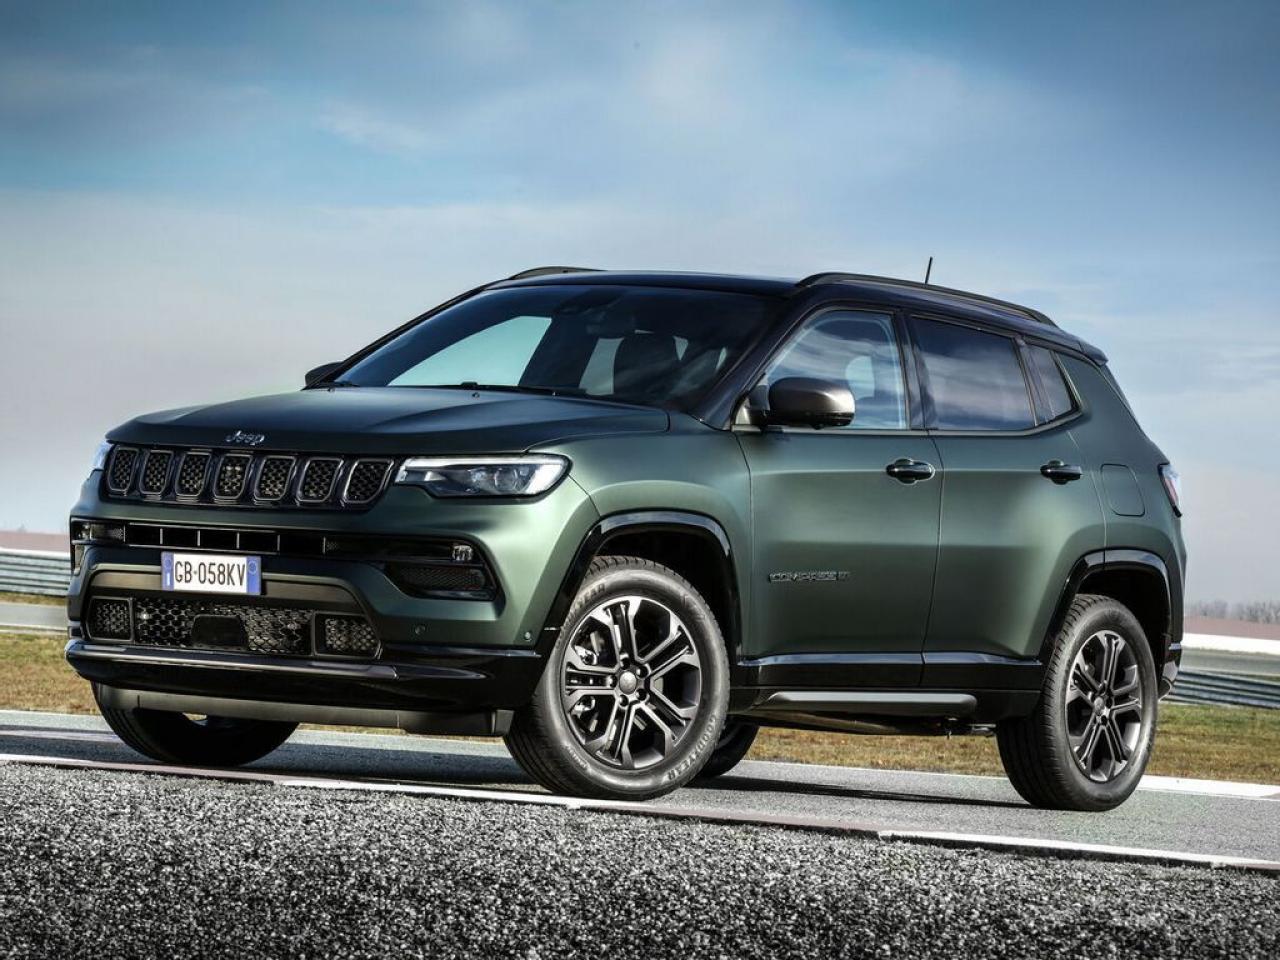 https://www.team-bhp.com/sites/default/files/styles/amp_high_res/public/New-Jeep-Compass-2021-a-deeper-restyling-than-it-looks_1.jpeg